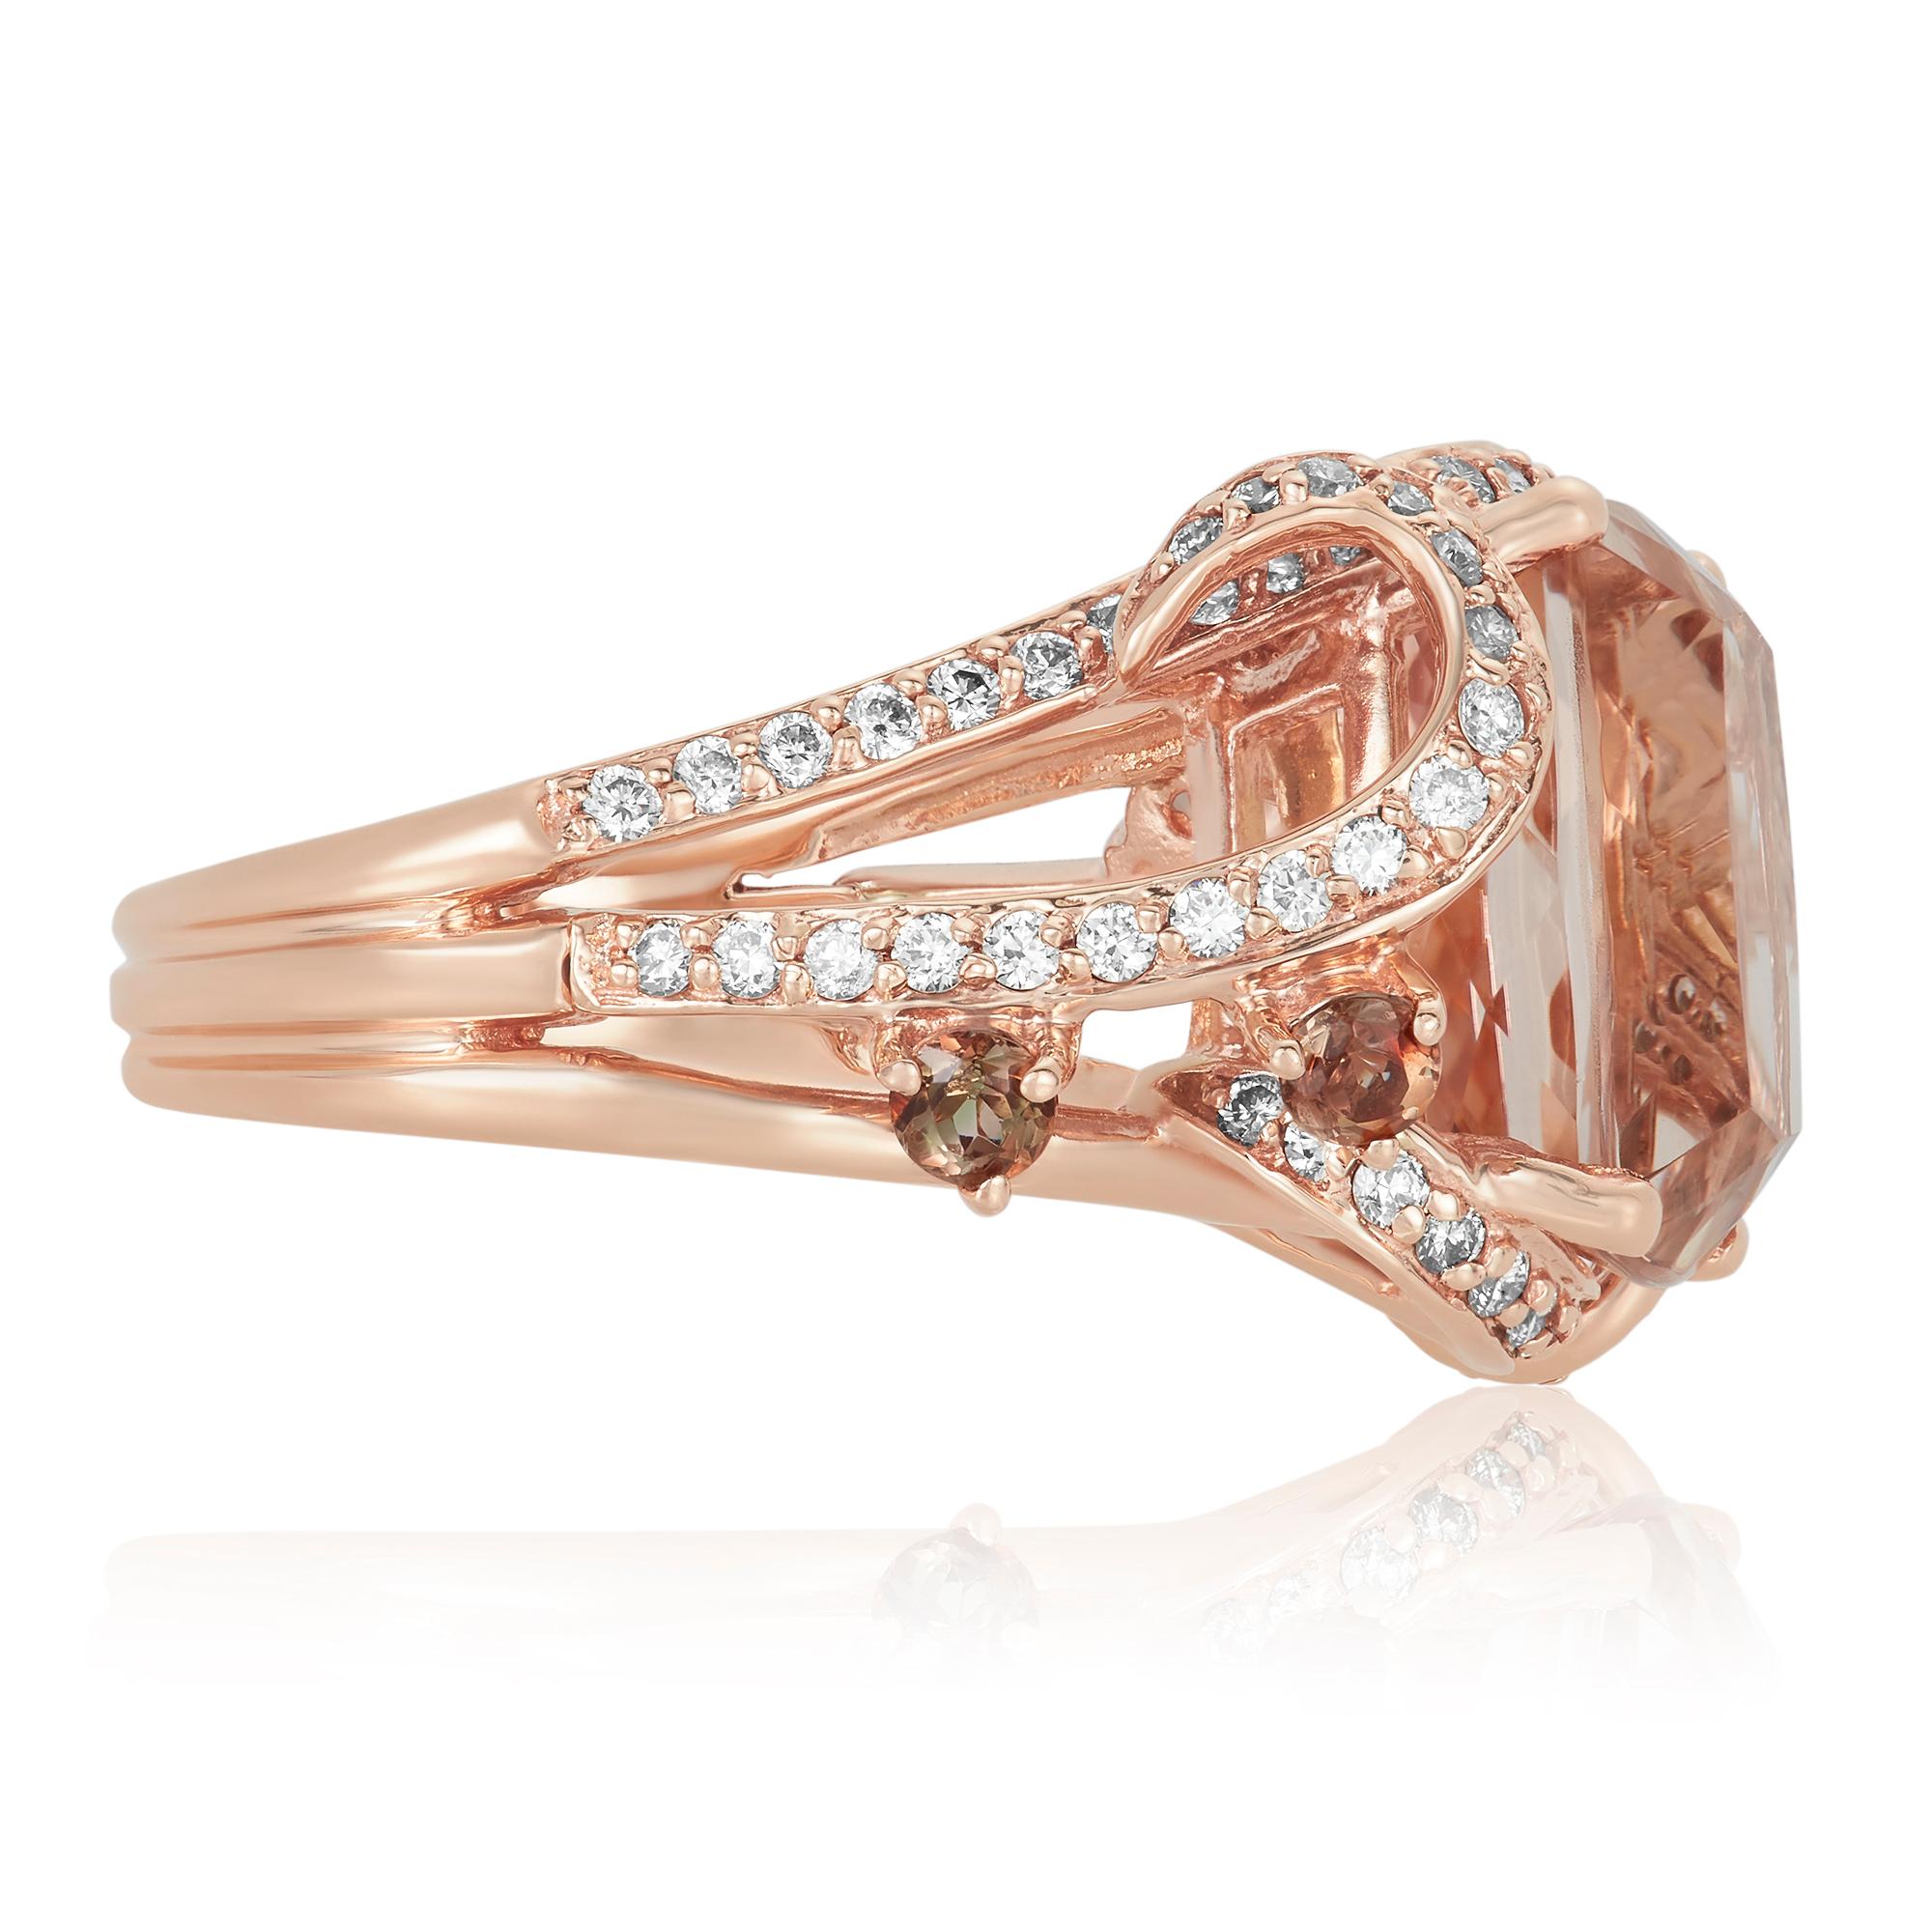 Metal: 14K Rose Gold
Center Stone: 1 Cushion Cut Pink Morganite at 7.58 ct - Measuring 10 x 14 mm 
Side Stones: 4 Round Andeluzite at 0.45 Carats
Diamond Details: 70 Brilliant Round White Diamonds at 0.80 Carats- Clarity: SI / Color H-I
Ring size: